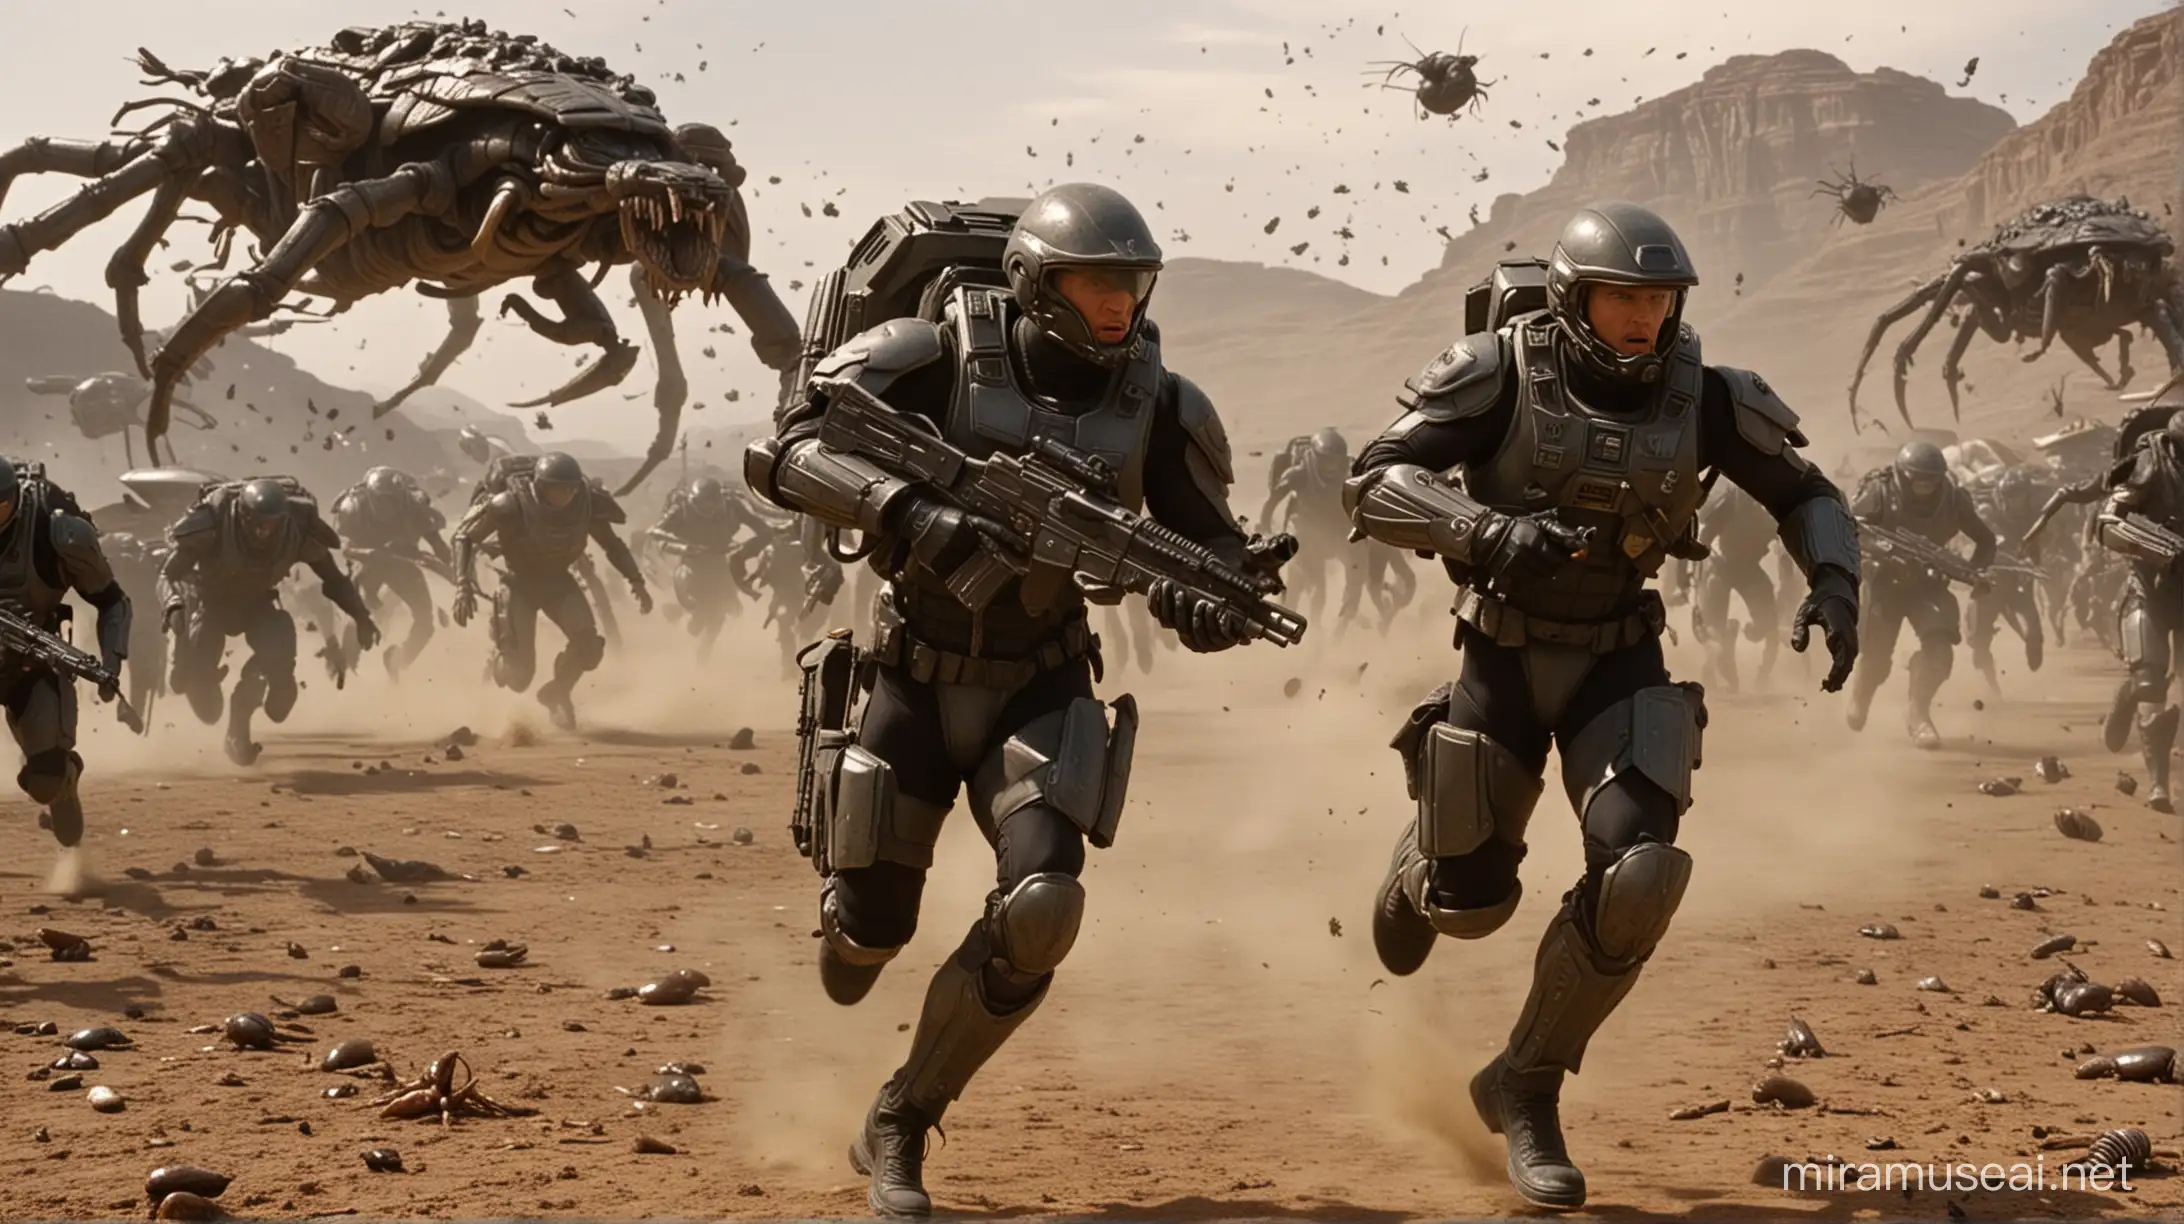 Starship Troopers, Soldier running from Alien bugs